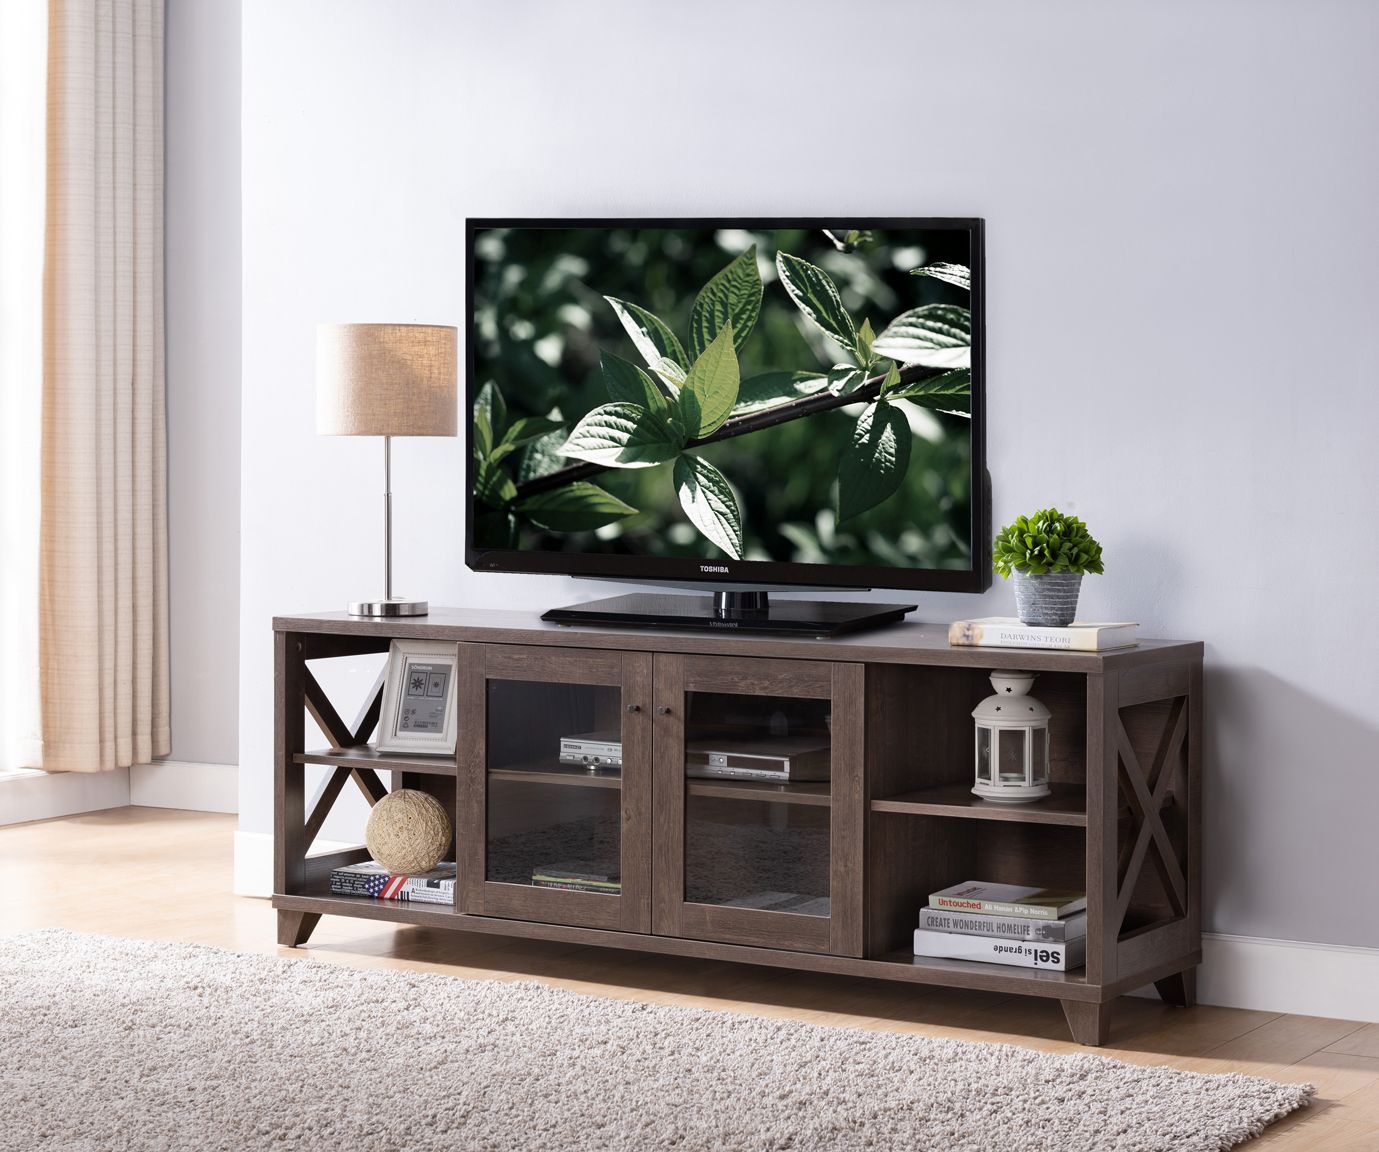 Id Usa 182321 Walnut Oak Color Tv Stand | Home In Oak Tv Cabinet With Doors (View 2 of 15)